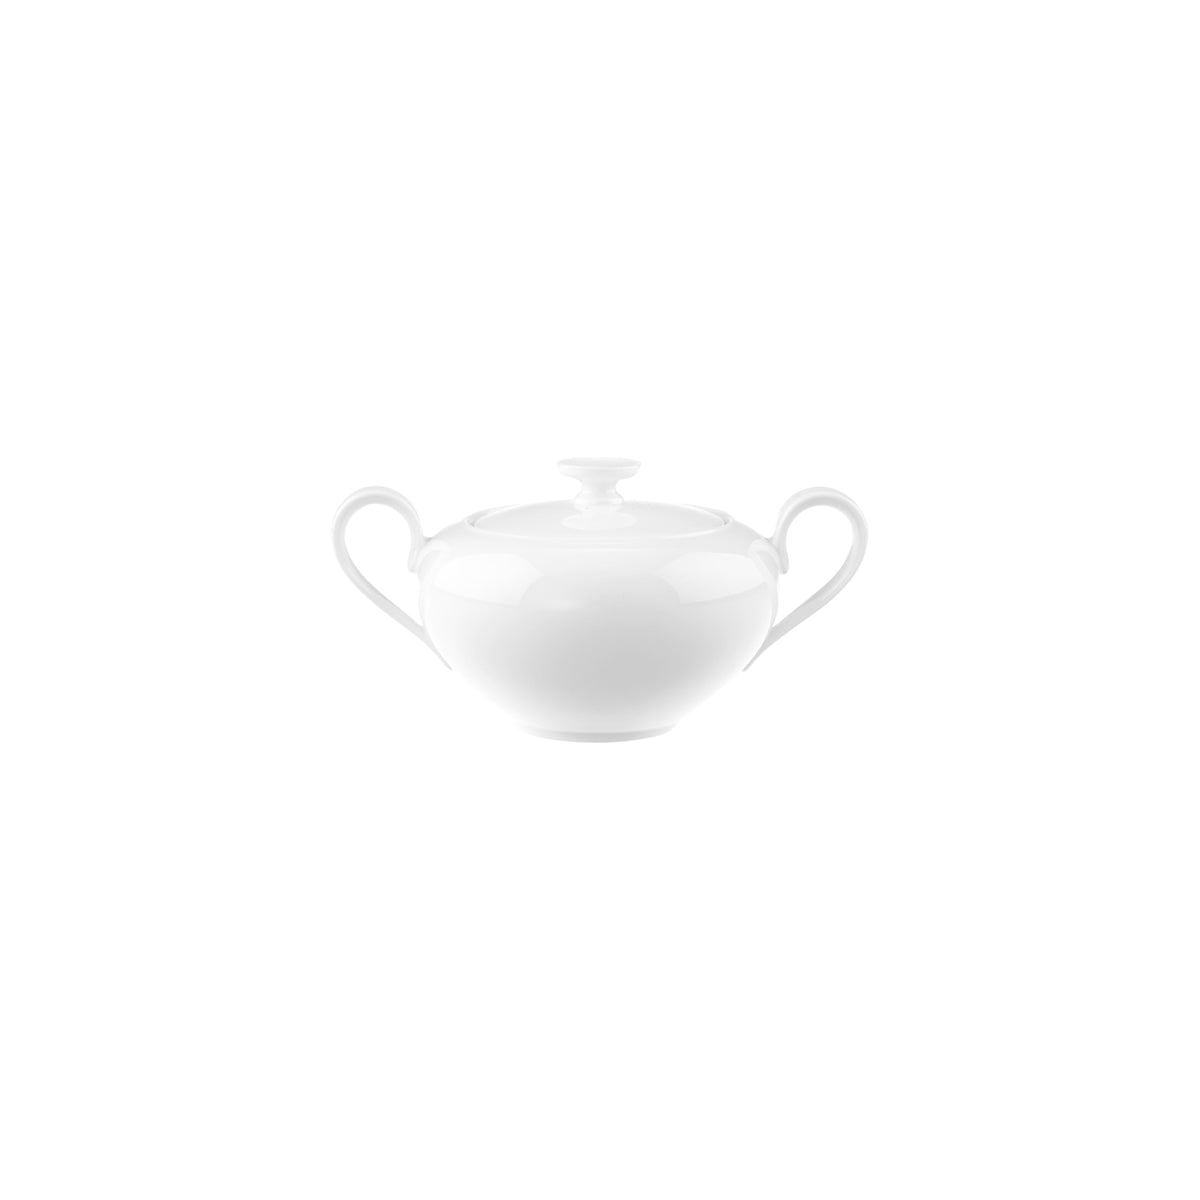 VB16-3272-0961 Villeroy And Boch Villeroy And Boch Stella Hotel White Sugar Bowl with Lid 350ml Tomkin Australia Hospitality Supplies